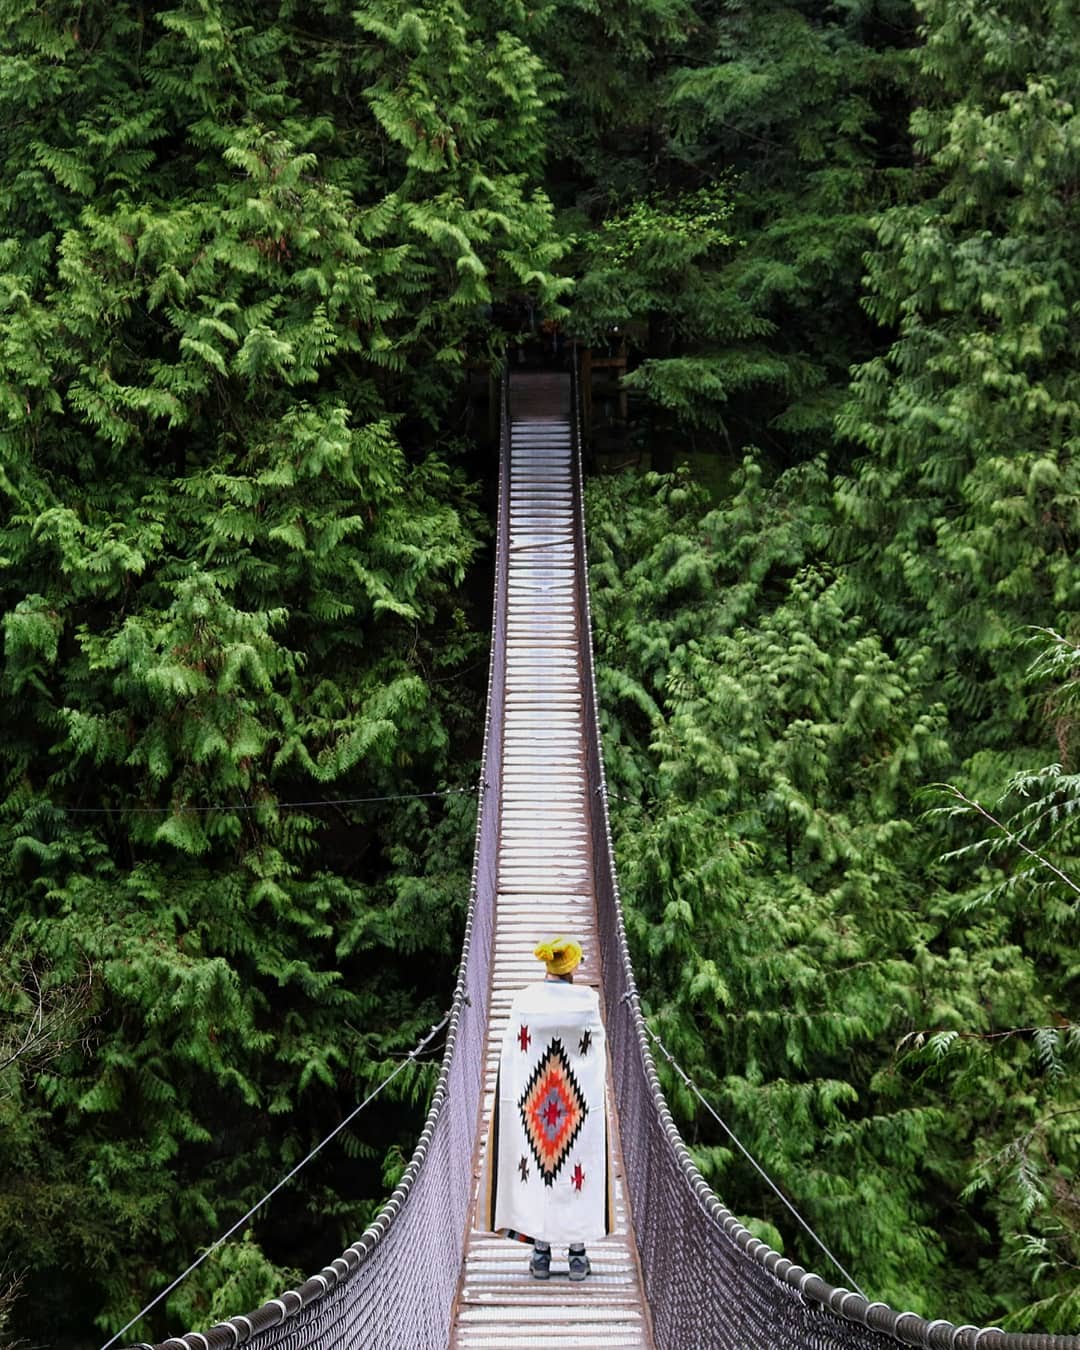 How to spend 48 hours in Vancouver, BC | 48 hours in Vancouver - Helena Bradbury | Canada British Columbia | Photography | Vancouver hikes | Granville Island | Vancouver Brewery | Lynn Canyon